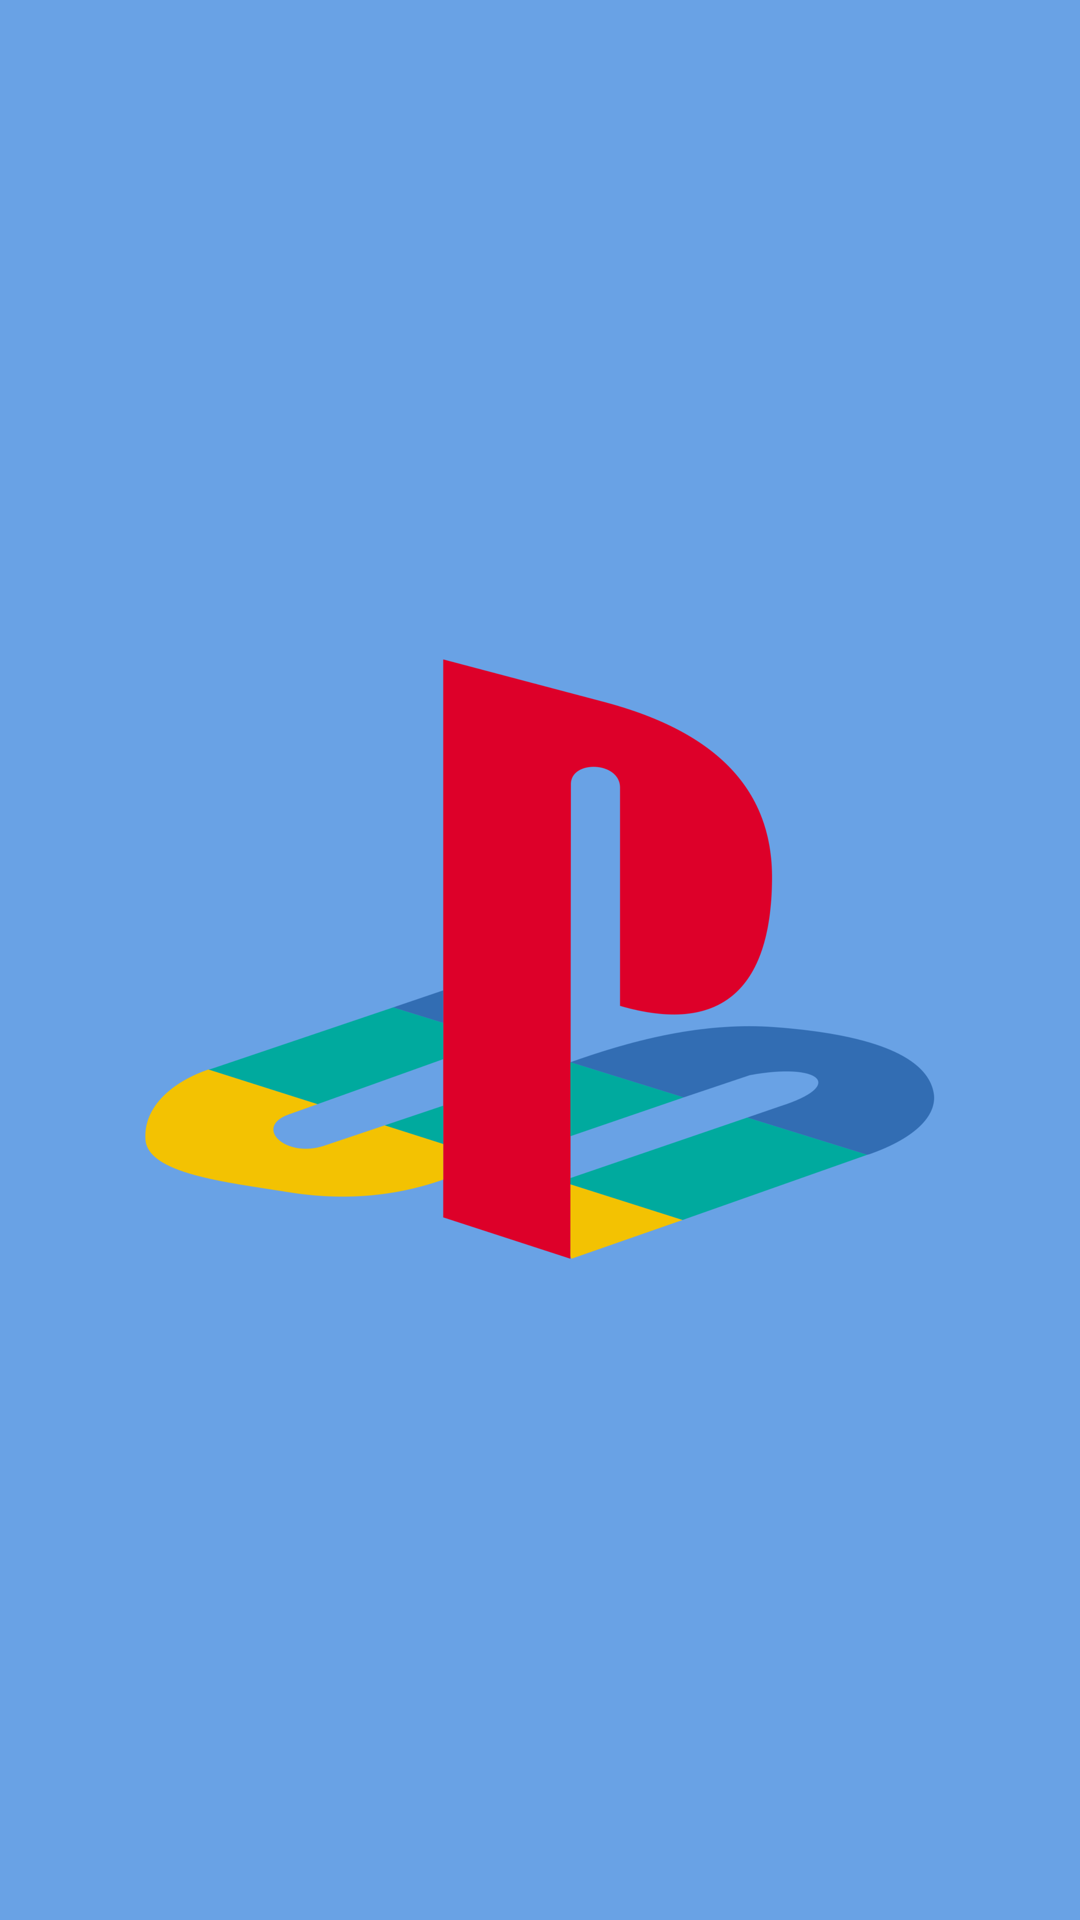 playstation #videogames #blue #green #yellow #red #vintage